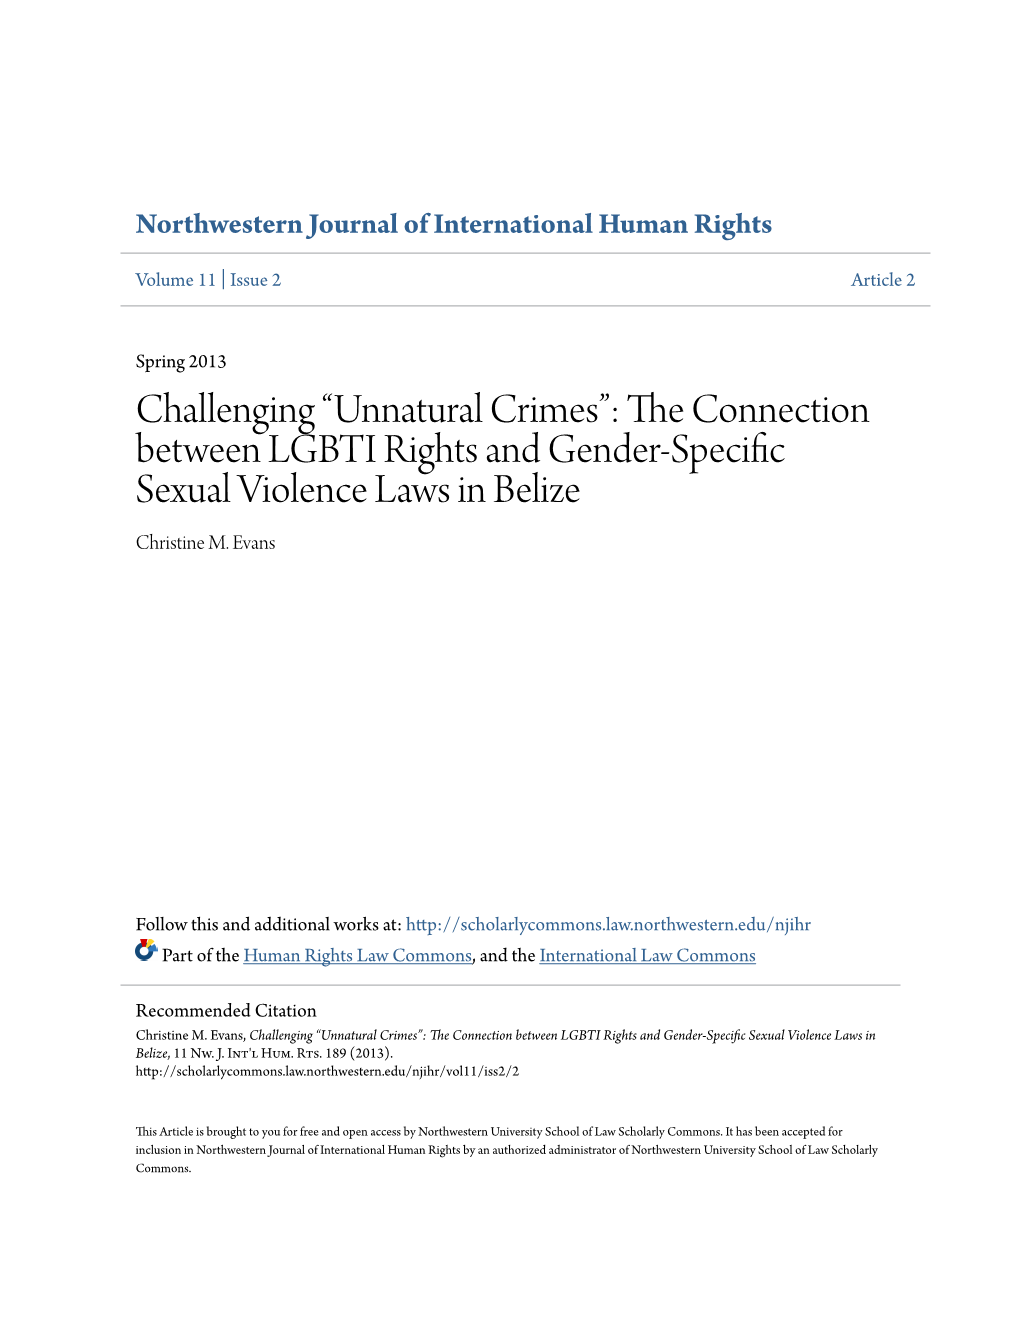 The Connection Between LGBTI Rights and Gender-Specific Sexual Violence Laws in Belize, 11 Nw